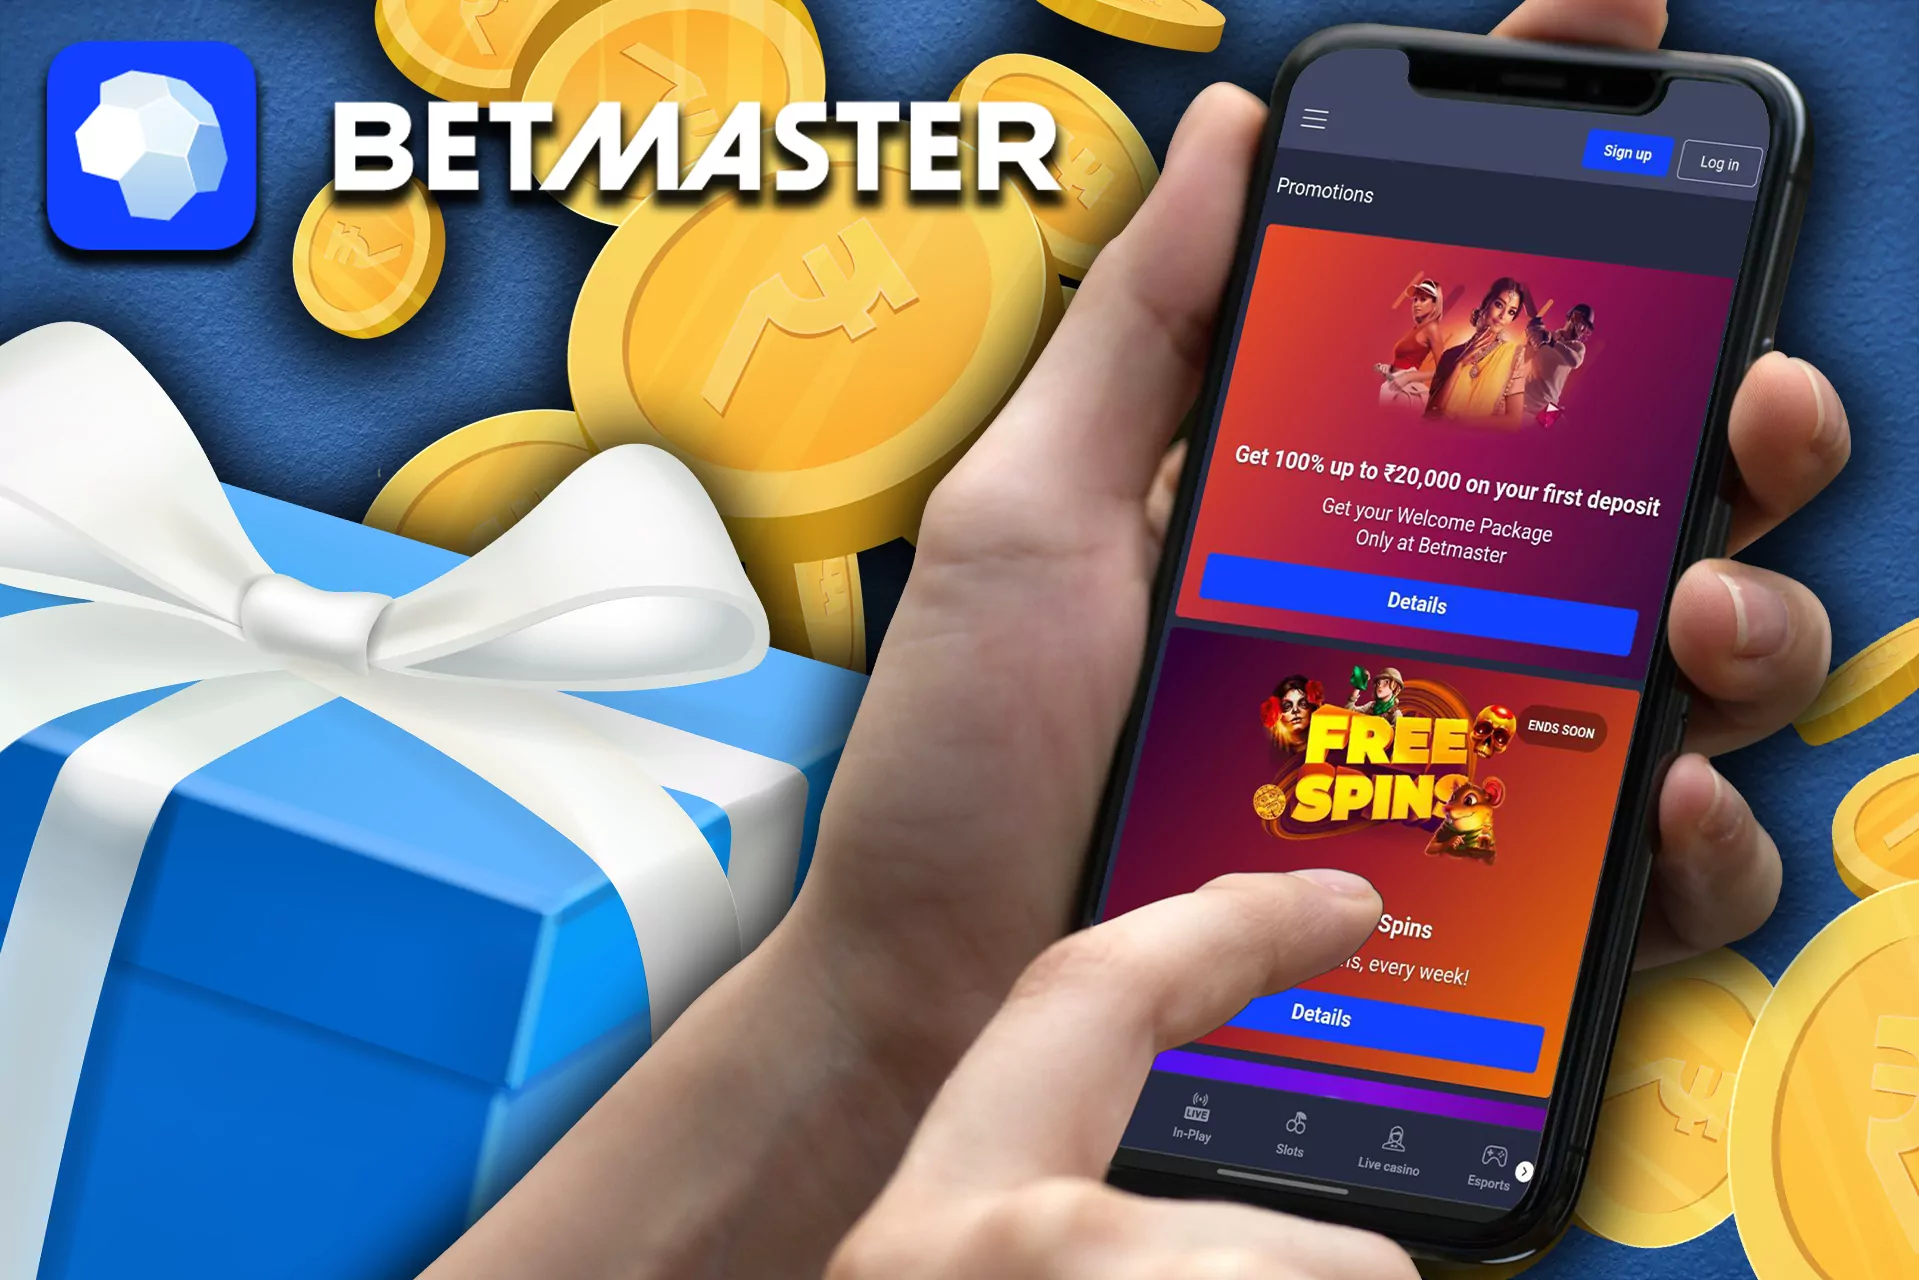 Download the Betmaster mobile app for even more bonuses.